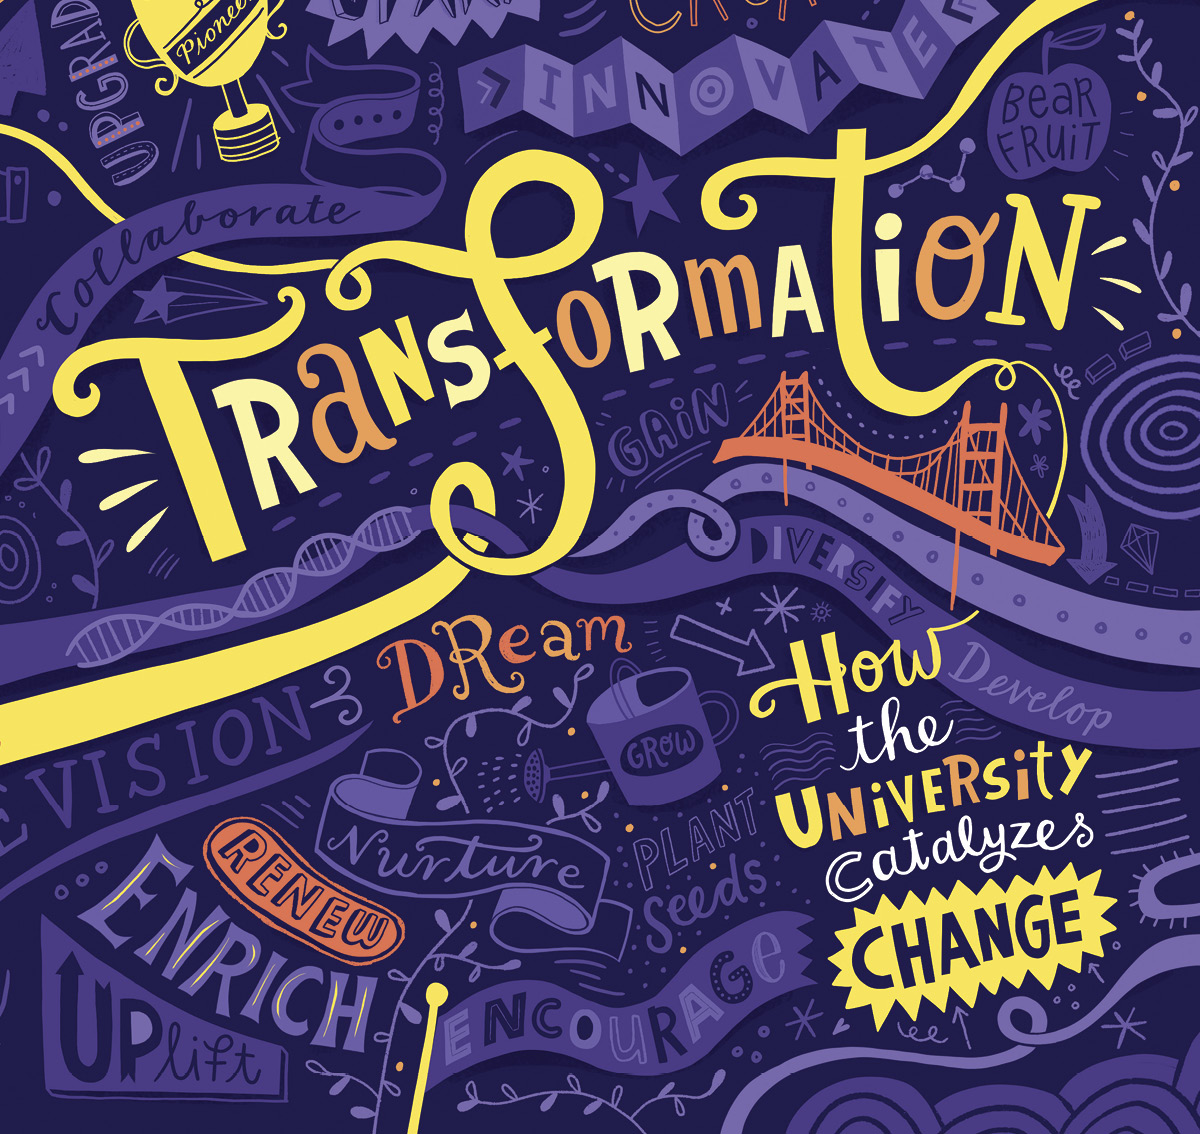 Magazine cover with transformation-themed phrases